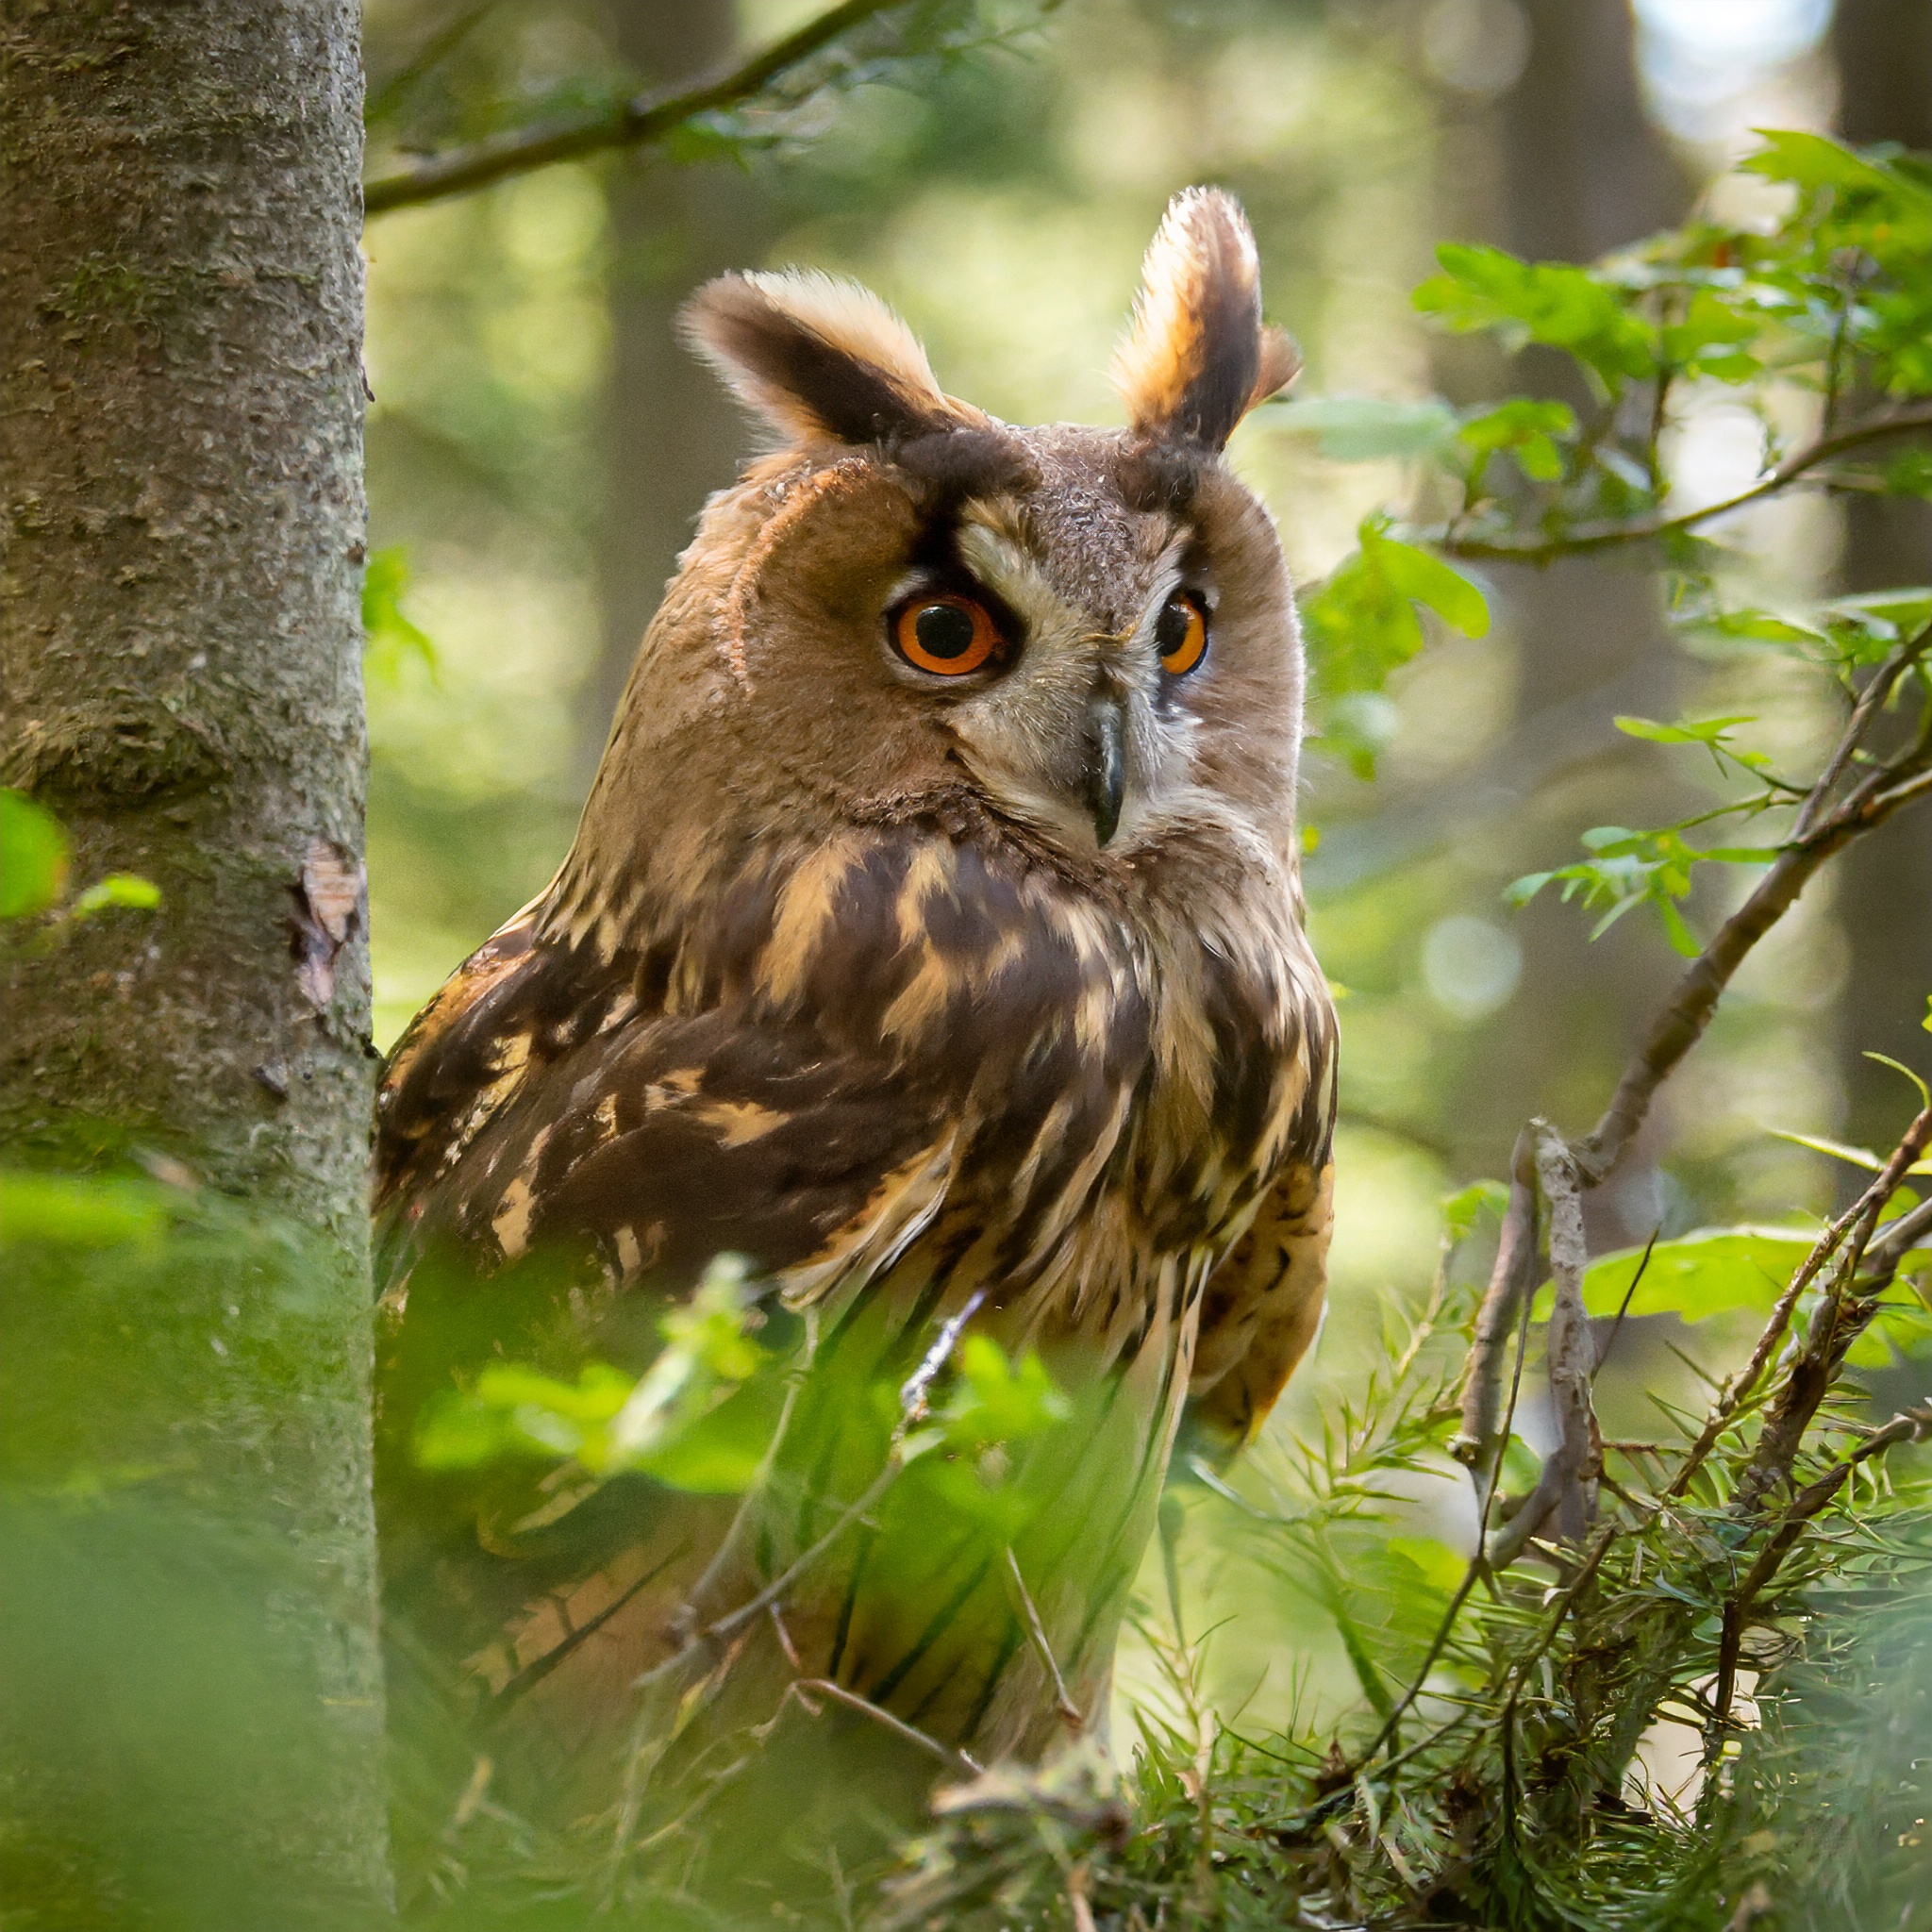 A brown owl in a forest